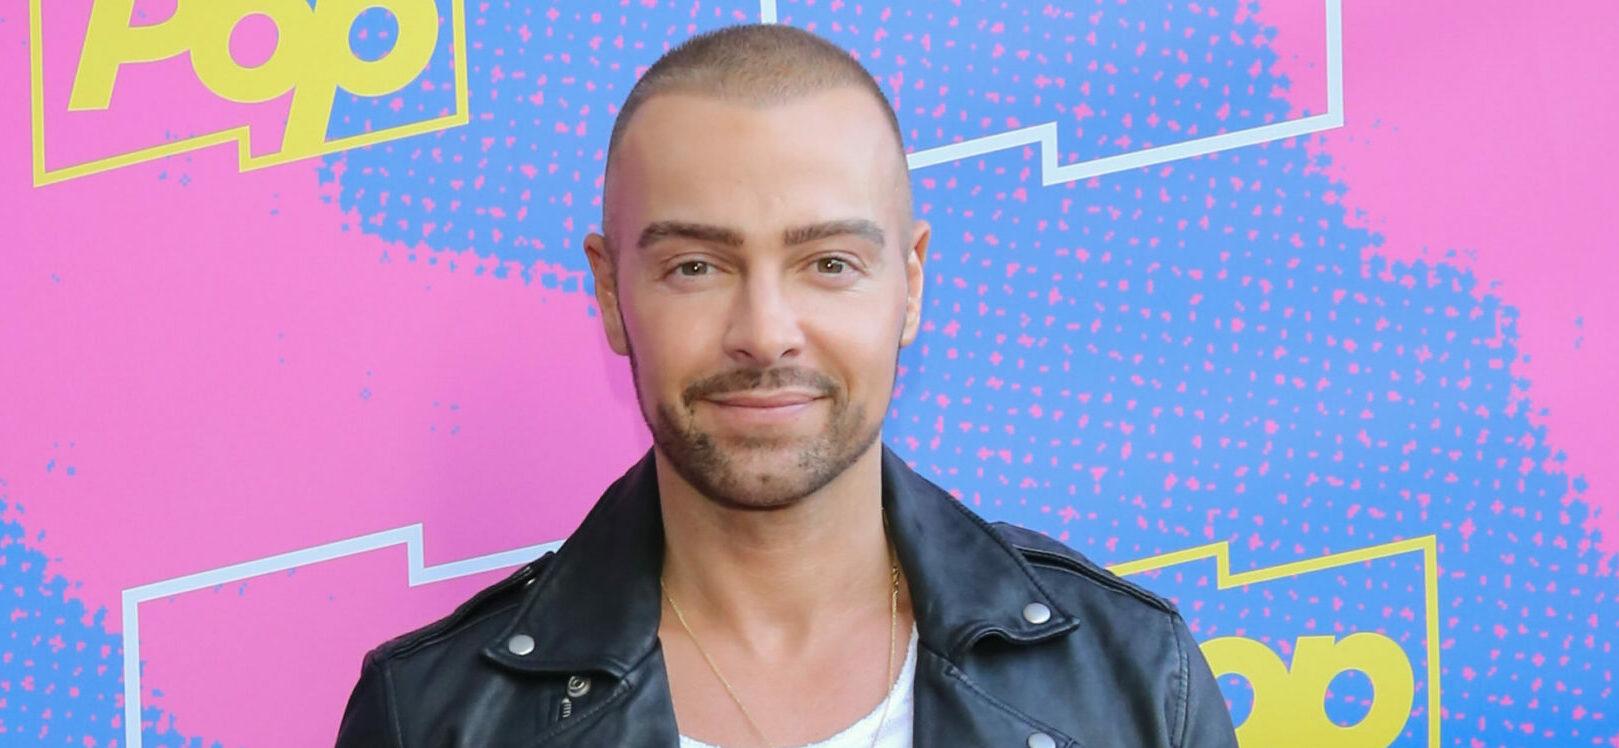 Joey Lawrence Finalizes Divorce From Ex-wife Chandie, Parties Agree On Joint Legal Custody